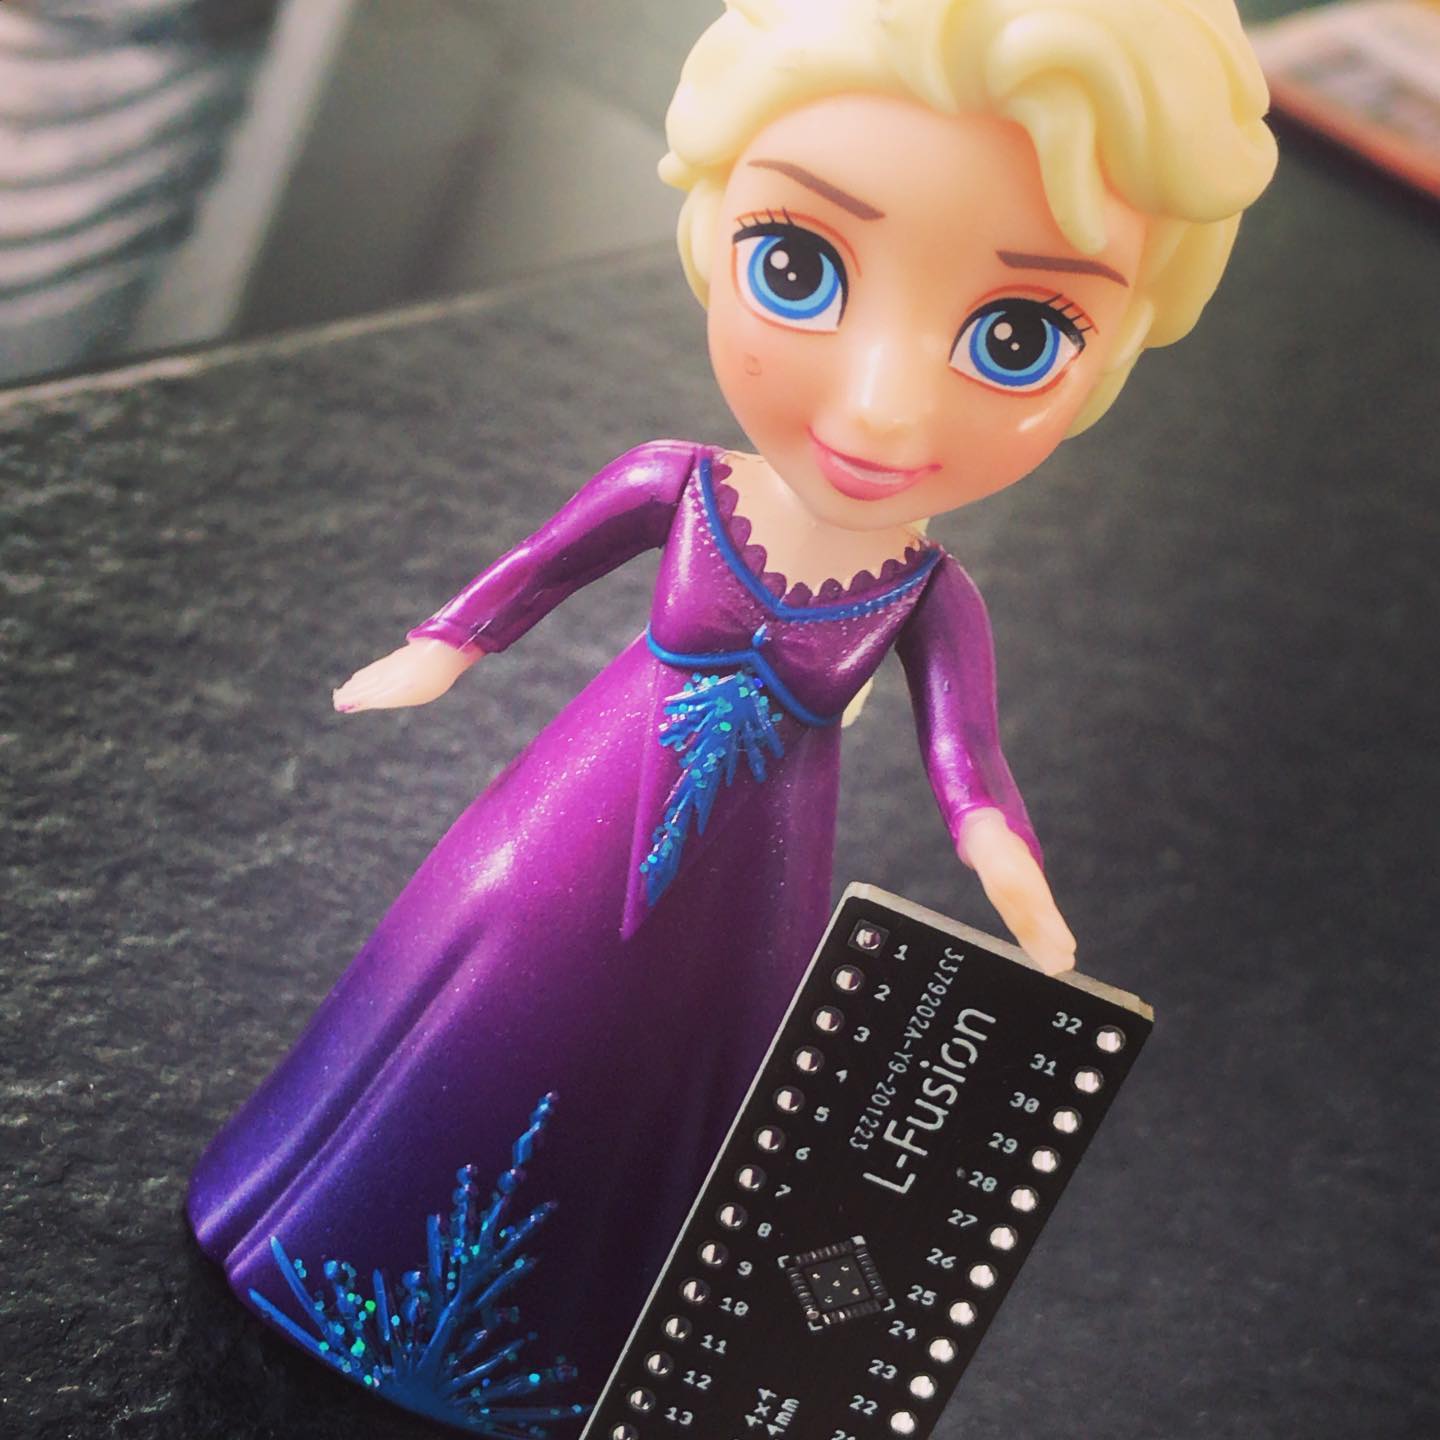 Elsa shows off her new QFN-adaptor for 4x8 with 0.4mm pitch. It is small af! Plan is to use it to solder a synth on a chip #ssi2130 on it for #breadboarding!  #sdiy #synthdiy #smt #soldering